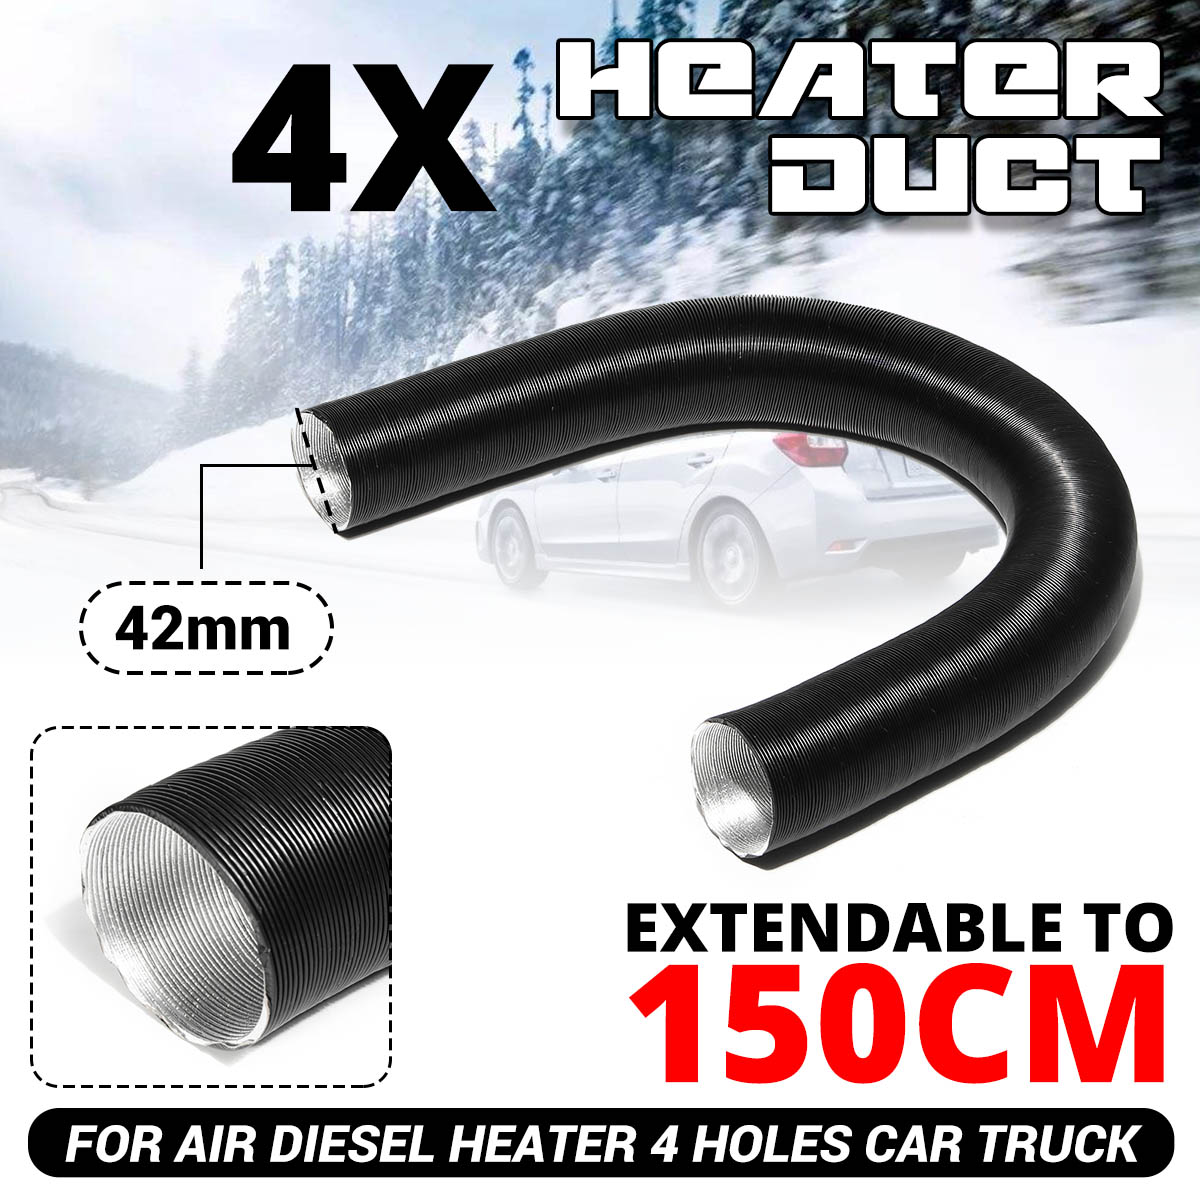 42mm-Outlet-Tube-Heater-Duct-Pipe-Air-Ducting-For-Air-Diesel-Heater-4-holes-Car-Truck-1632314-2